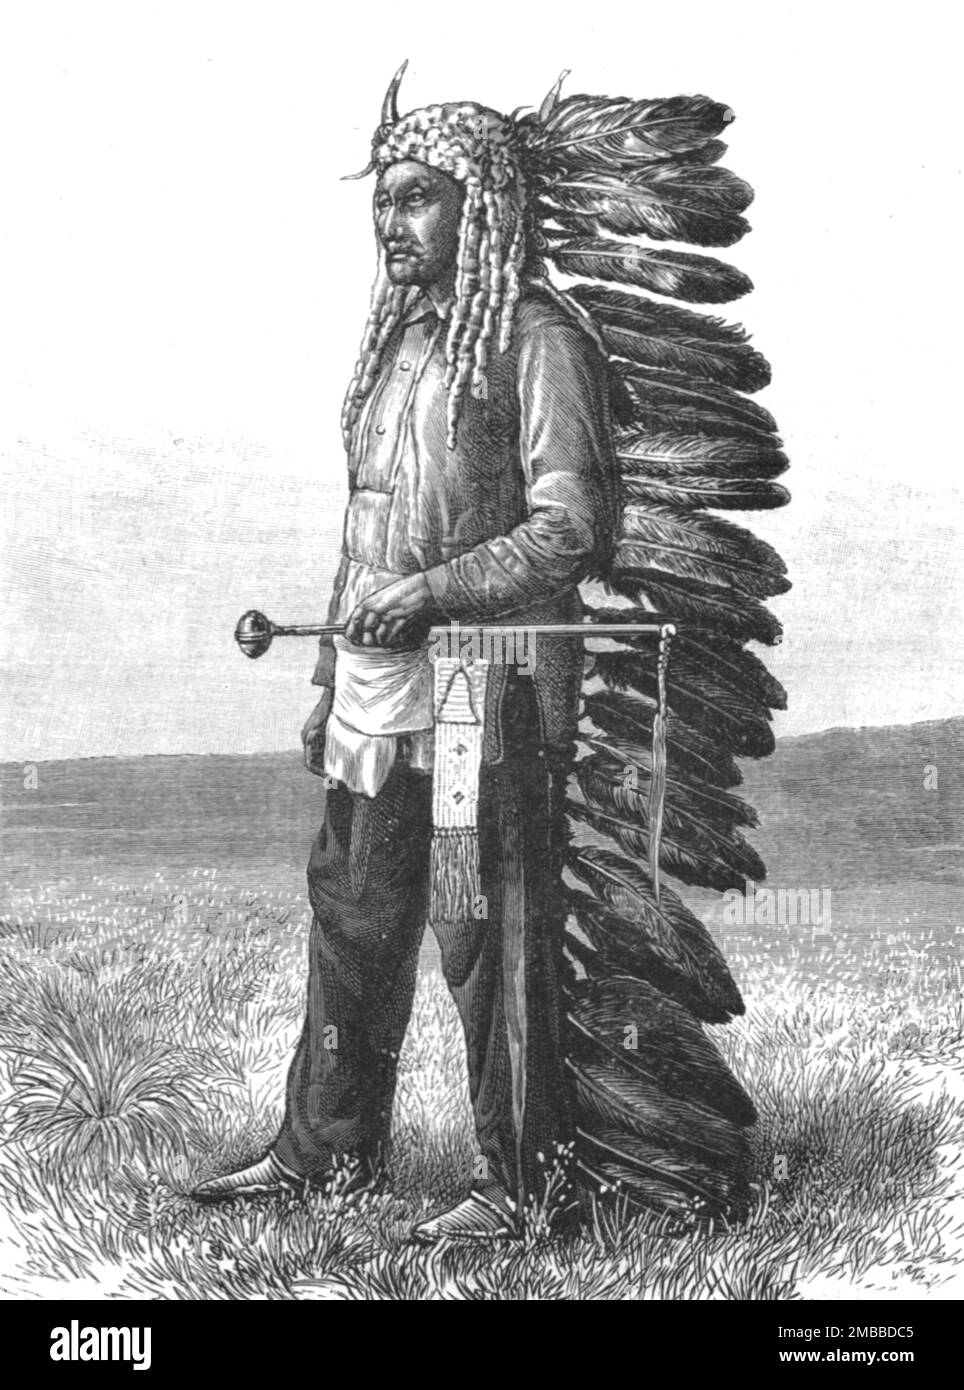 „The Threatened Rising of American Indians; Sitting Bull, Chief of the Sioux Indians“, 1890. Aus „The Graphic. An Illustrated Weekly Newspaper“, Band 42. Juli bis Dezember 1890. Stockfoto